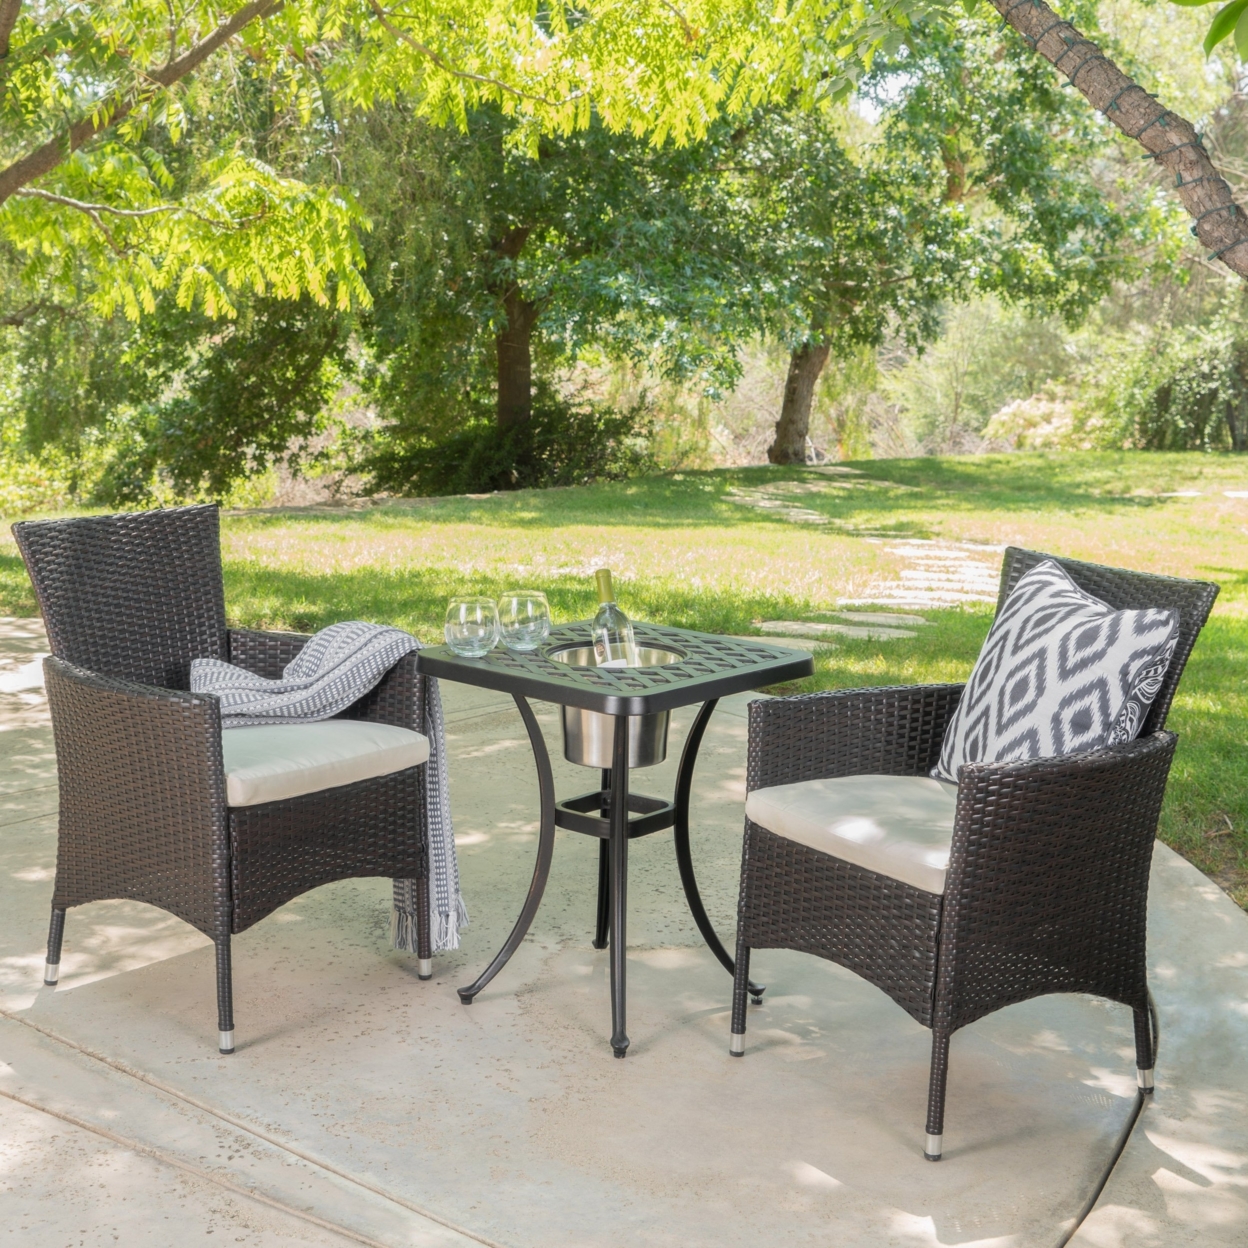 Ariel Outdoor 3Pc Wicker Bistro Set With Water Resistant Cushions